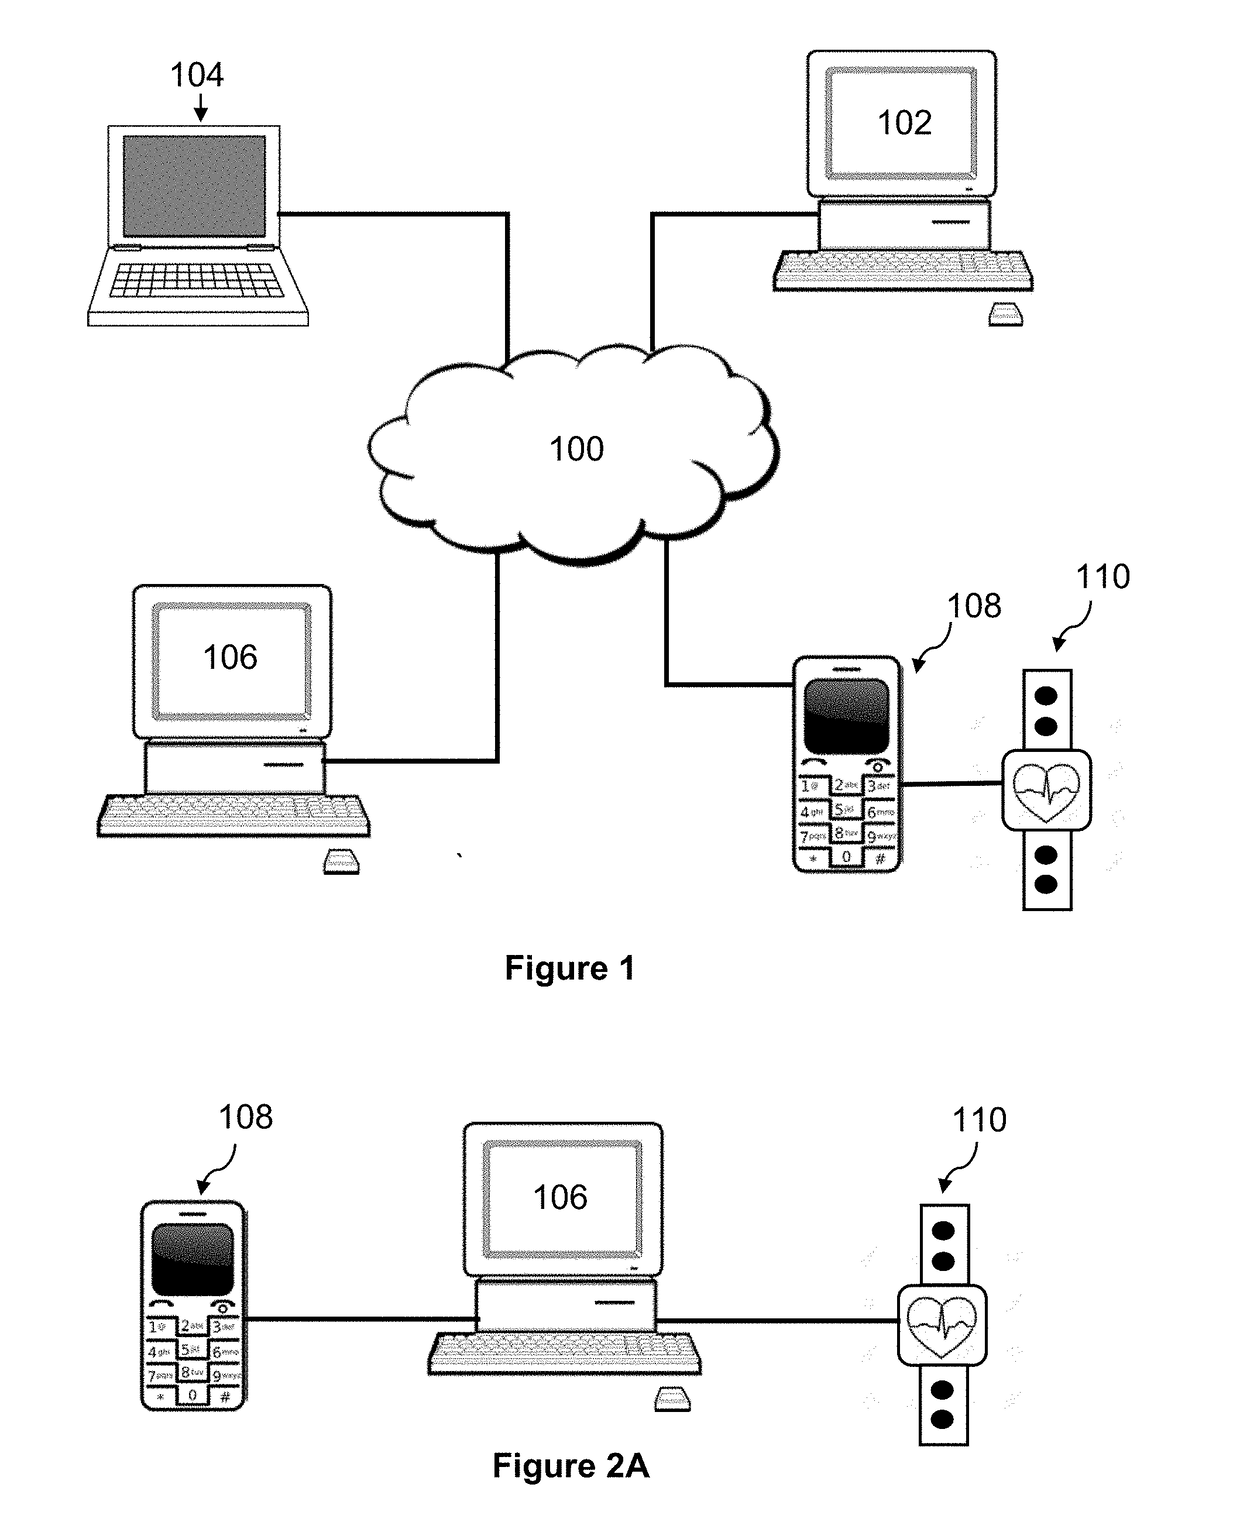 System and Method for Using, Biometric, and Displaying Biometric Data